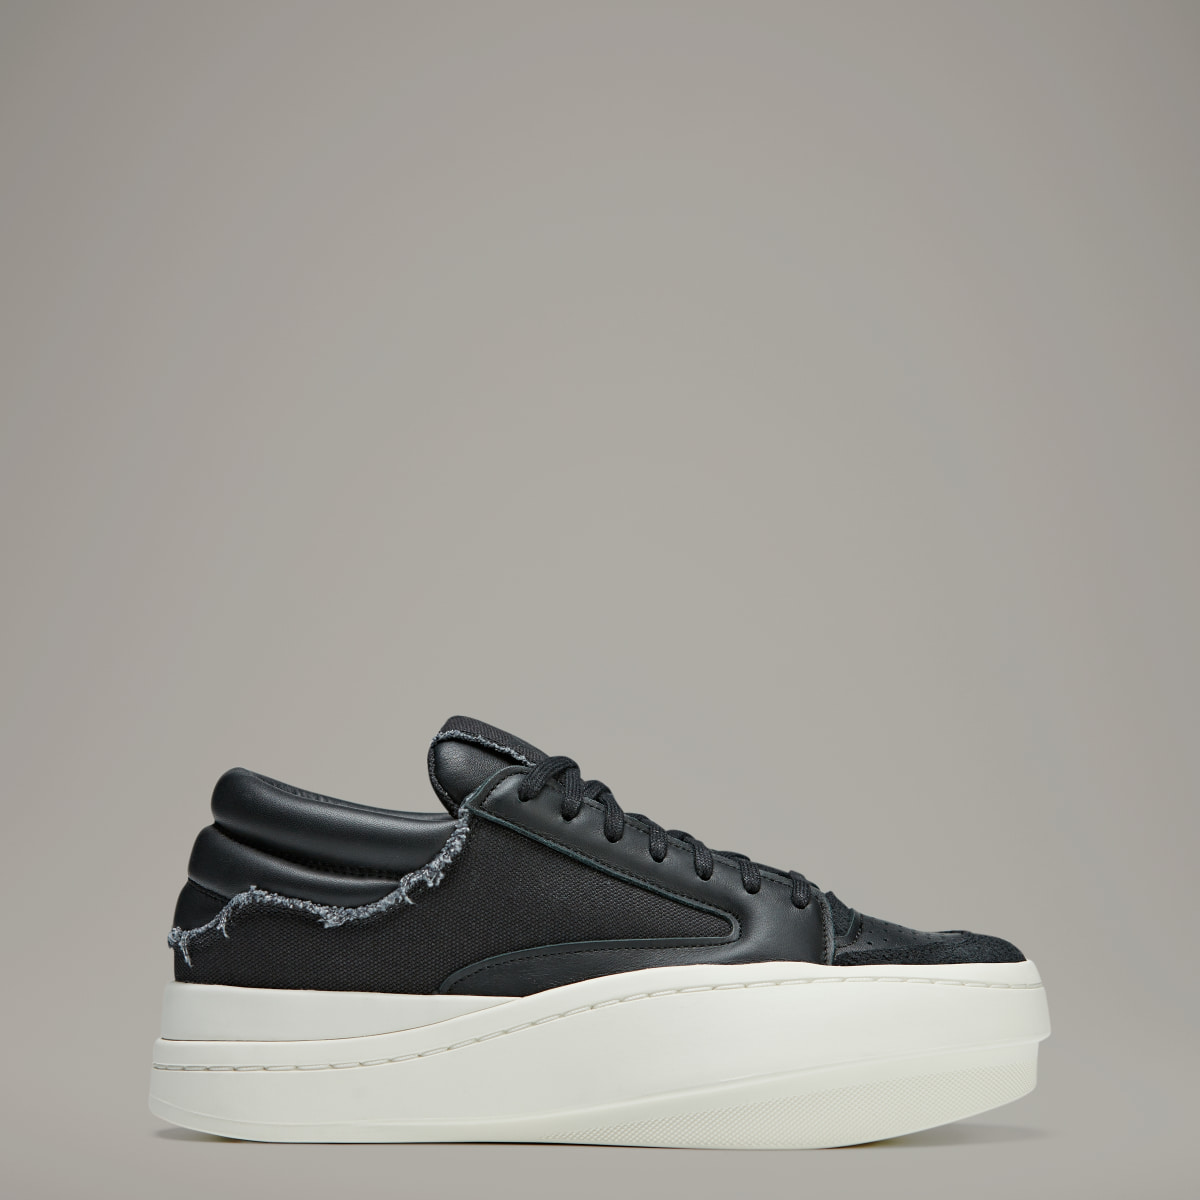 Adidas Y-3 Centennial Low Shoes. 2